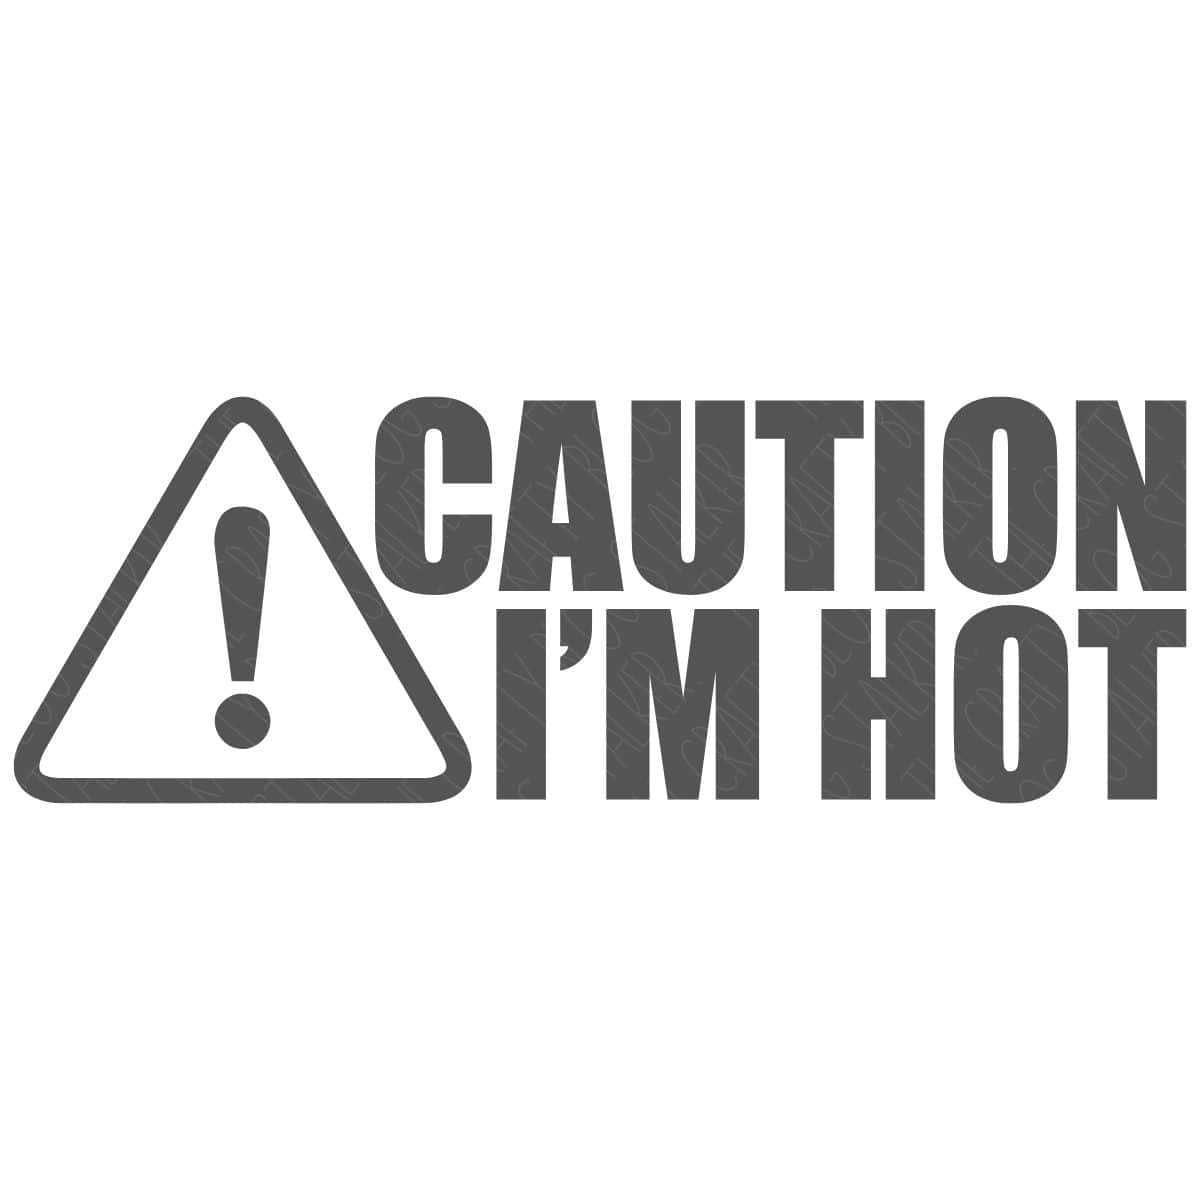 I'm Hot Caution SVG	

			
		
	

		
			$2.50 – Buy Now Checkout
							
					
						
							
						
						Added to cart